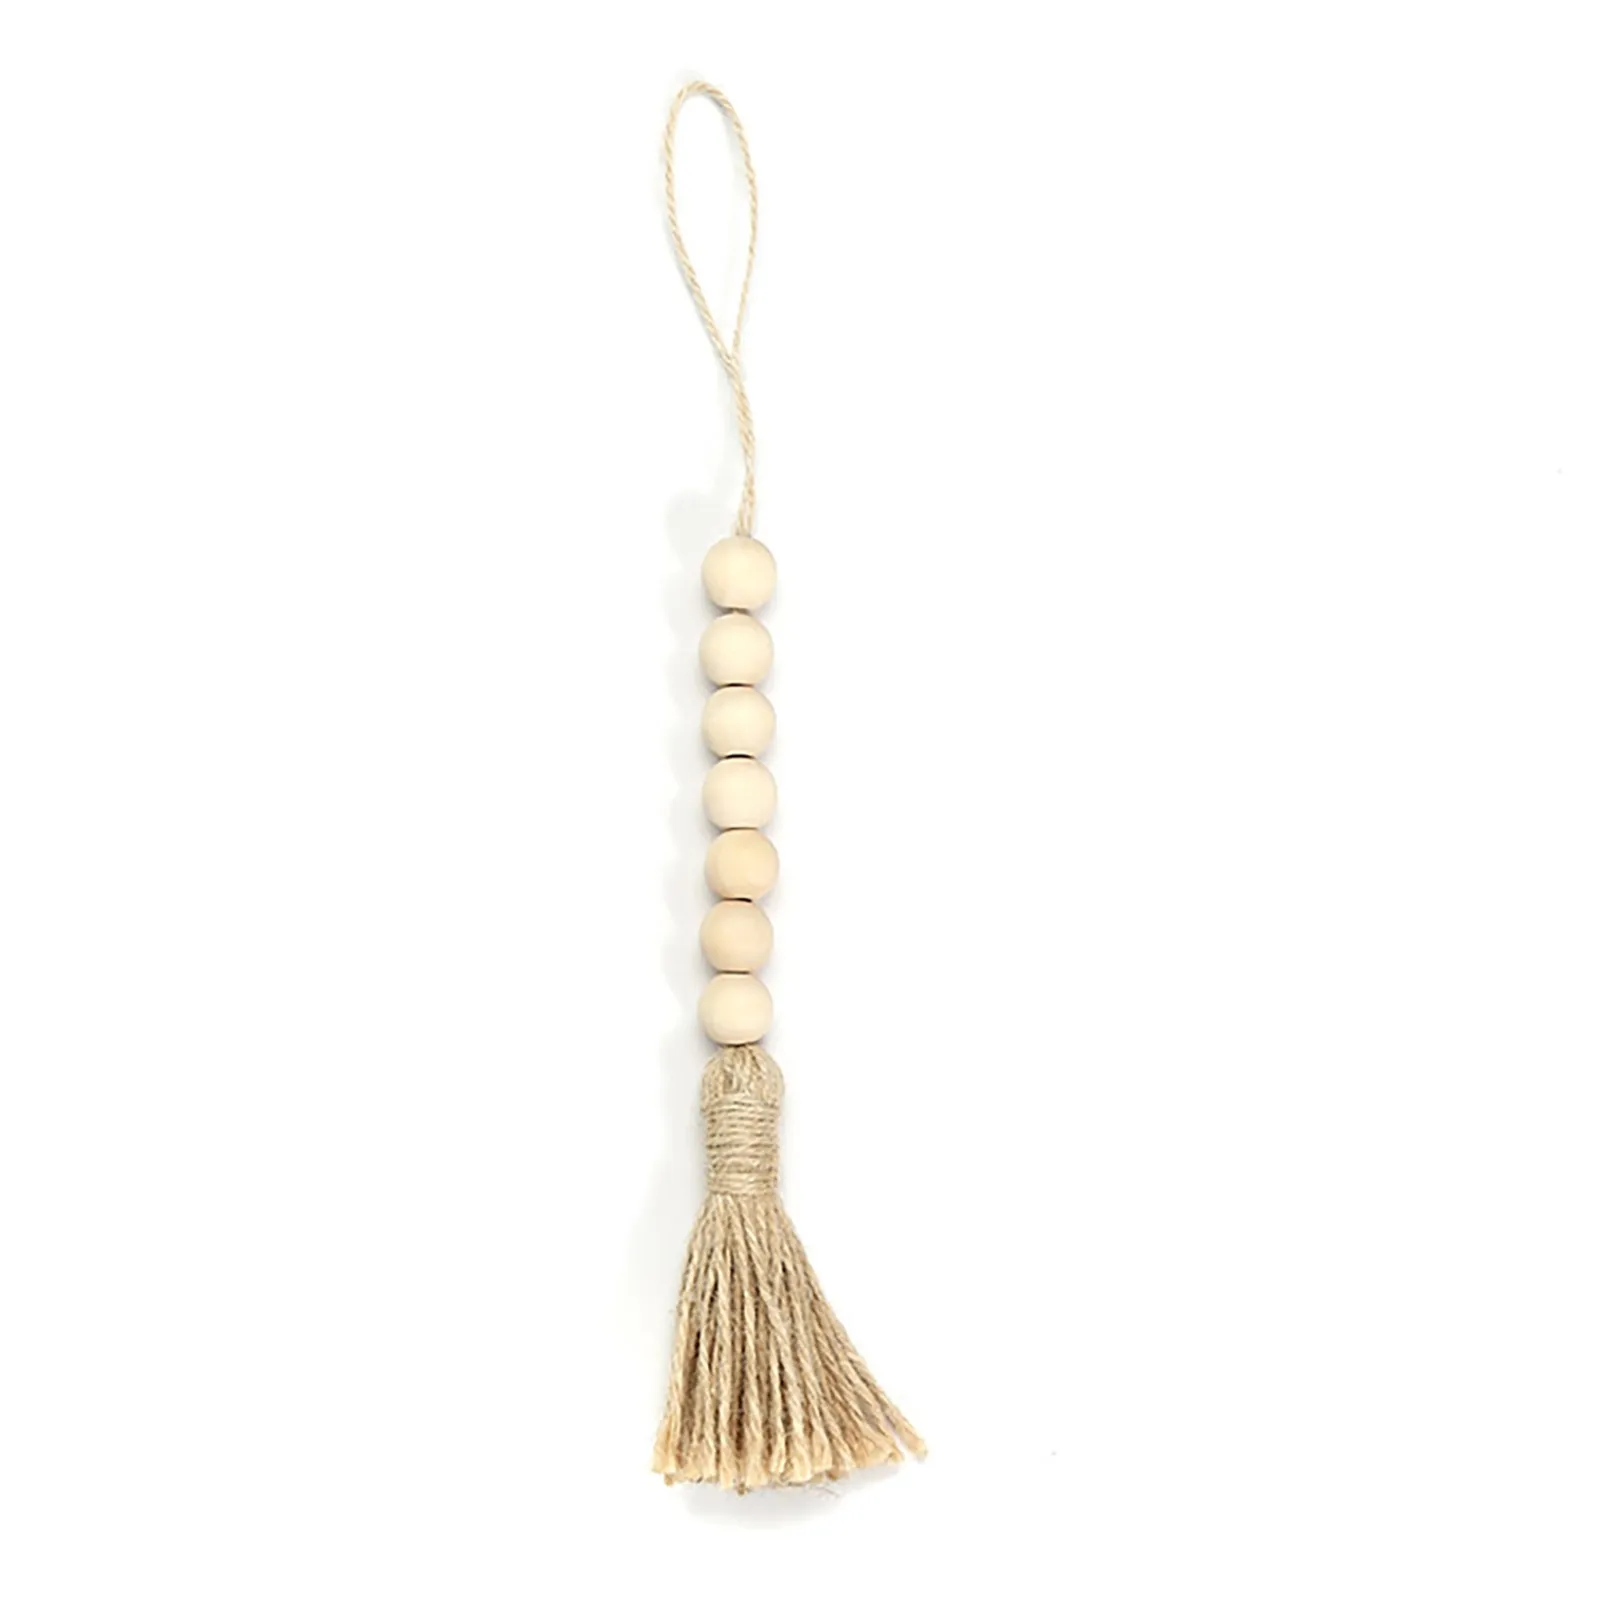 Details about   With Tassels Home Decor Wall Hanging DIY Crafts Jute Rope Wood Bead Garland 304 